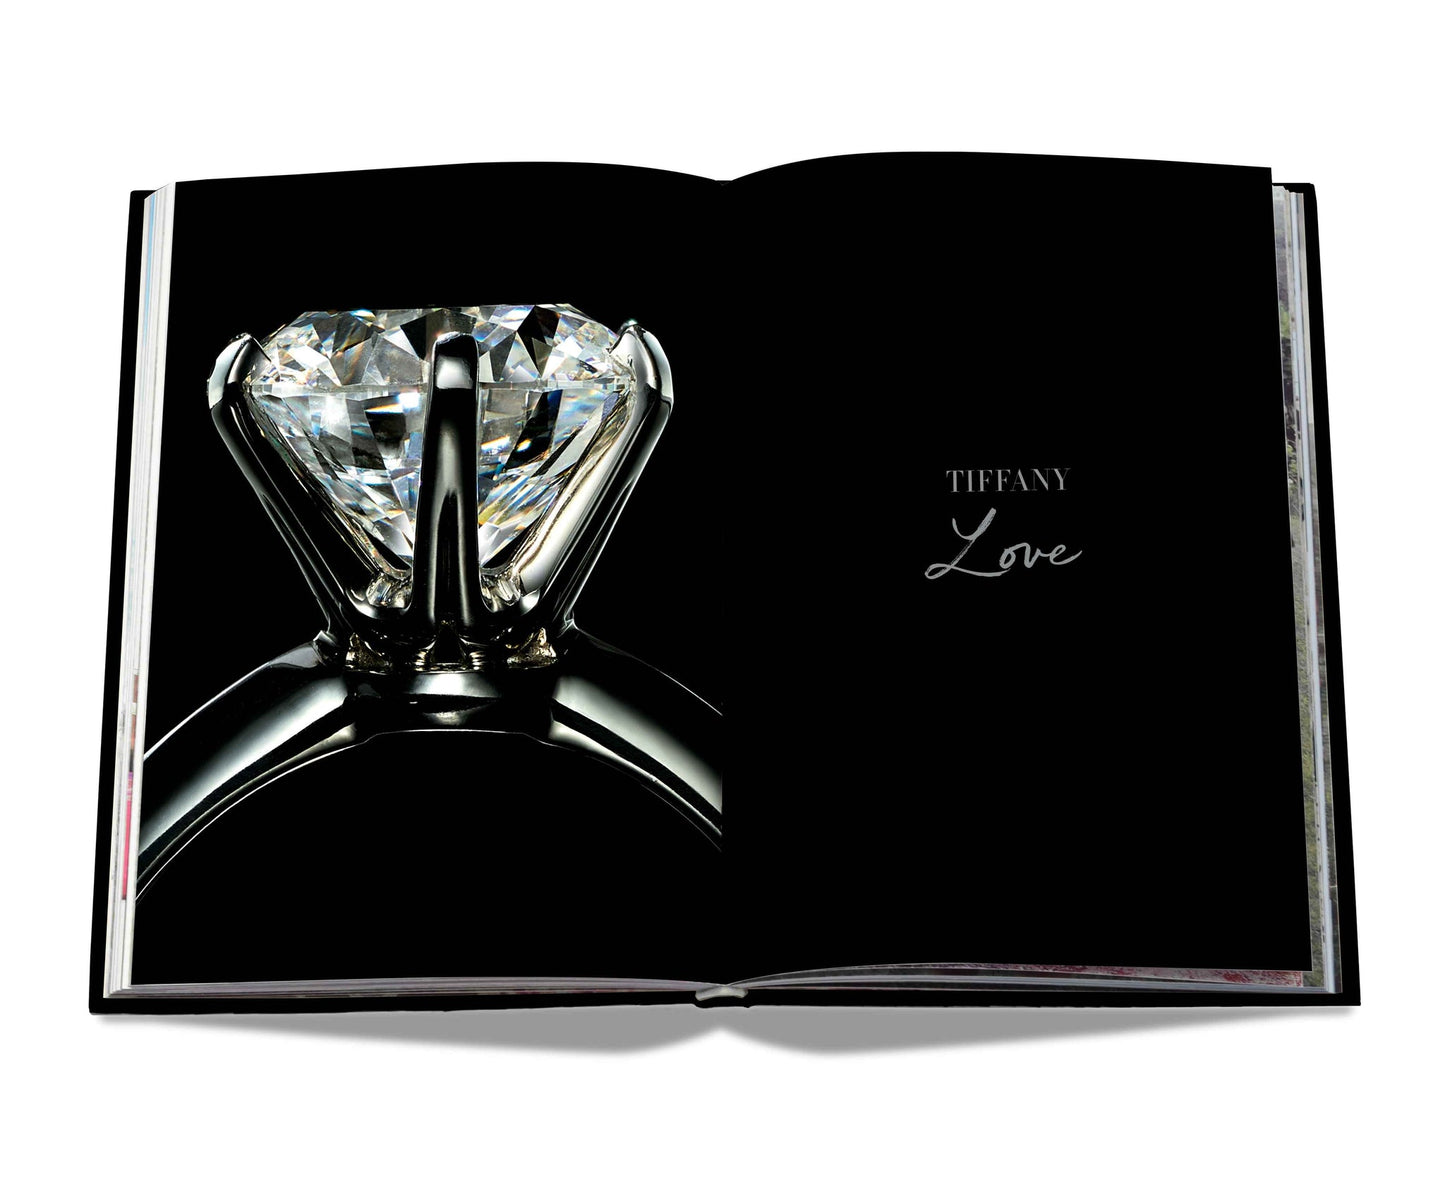 Tiffany & Co: Vision & Virtuosity (Icon Edition) by Assouline